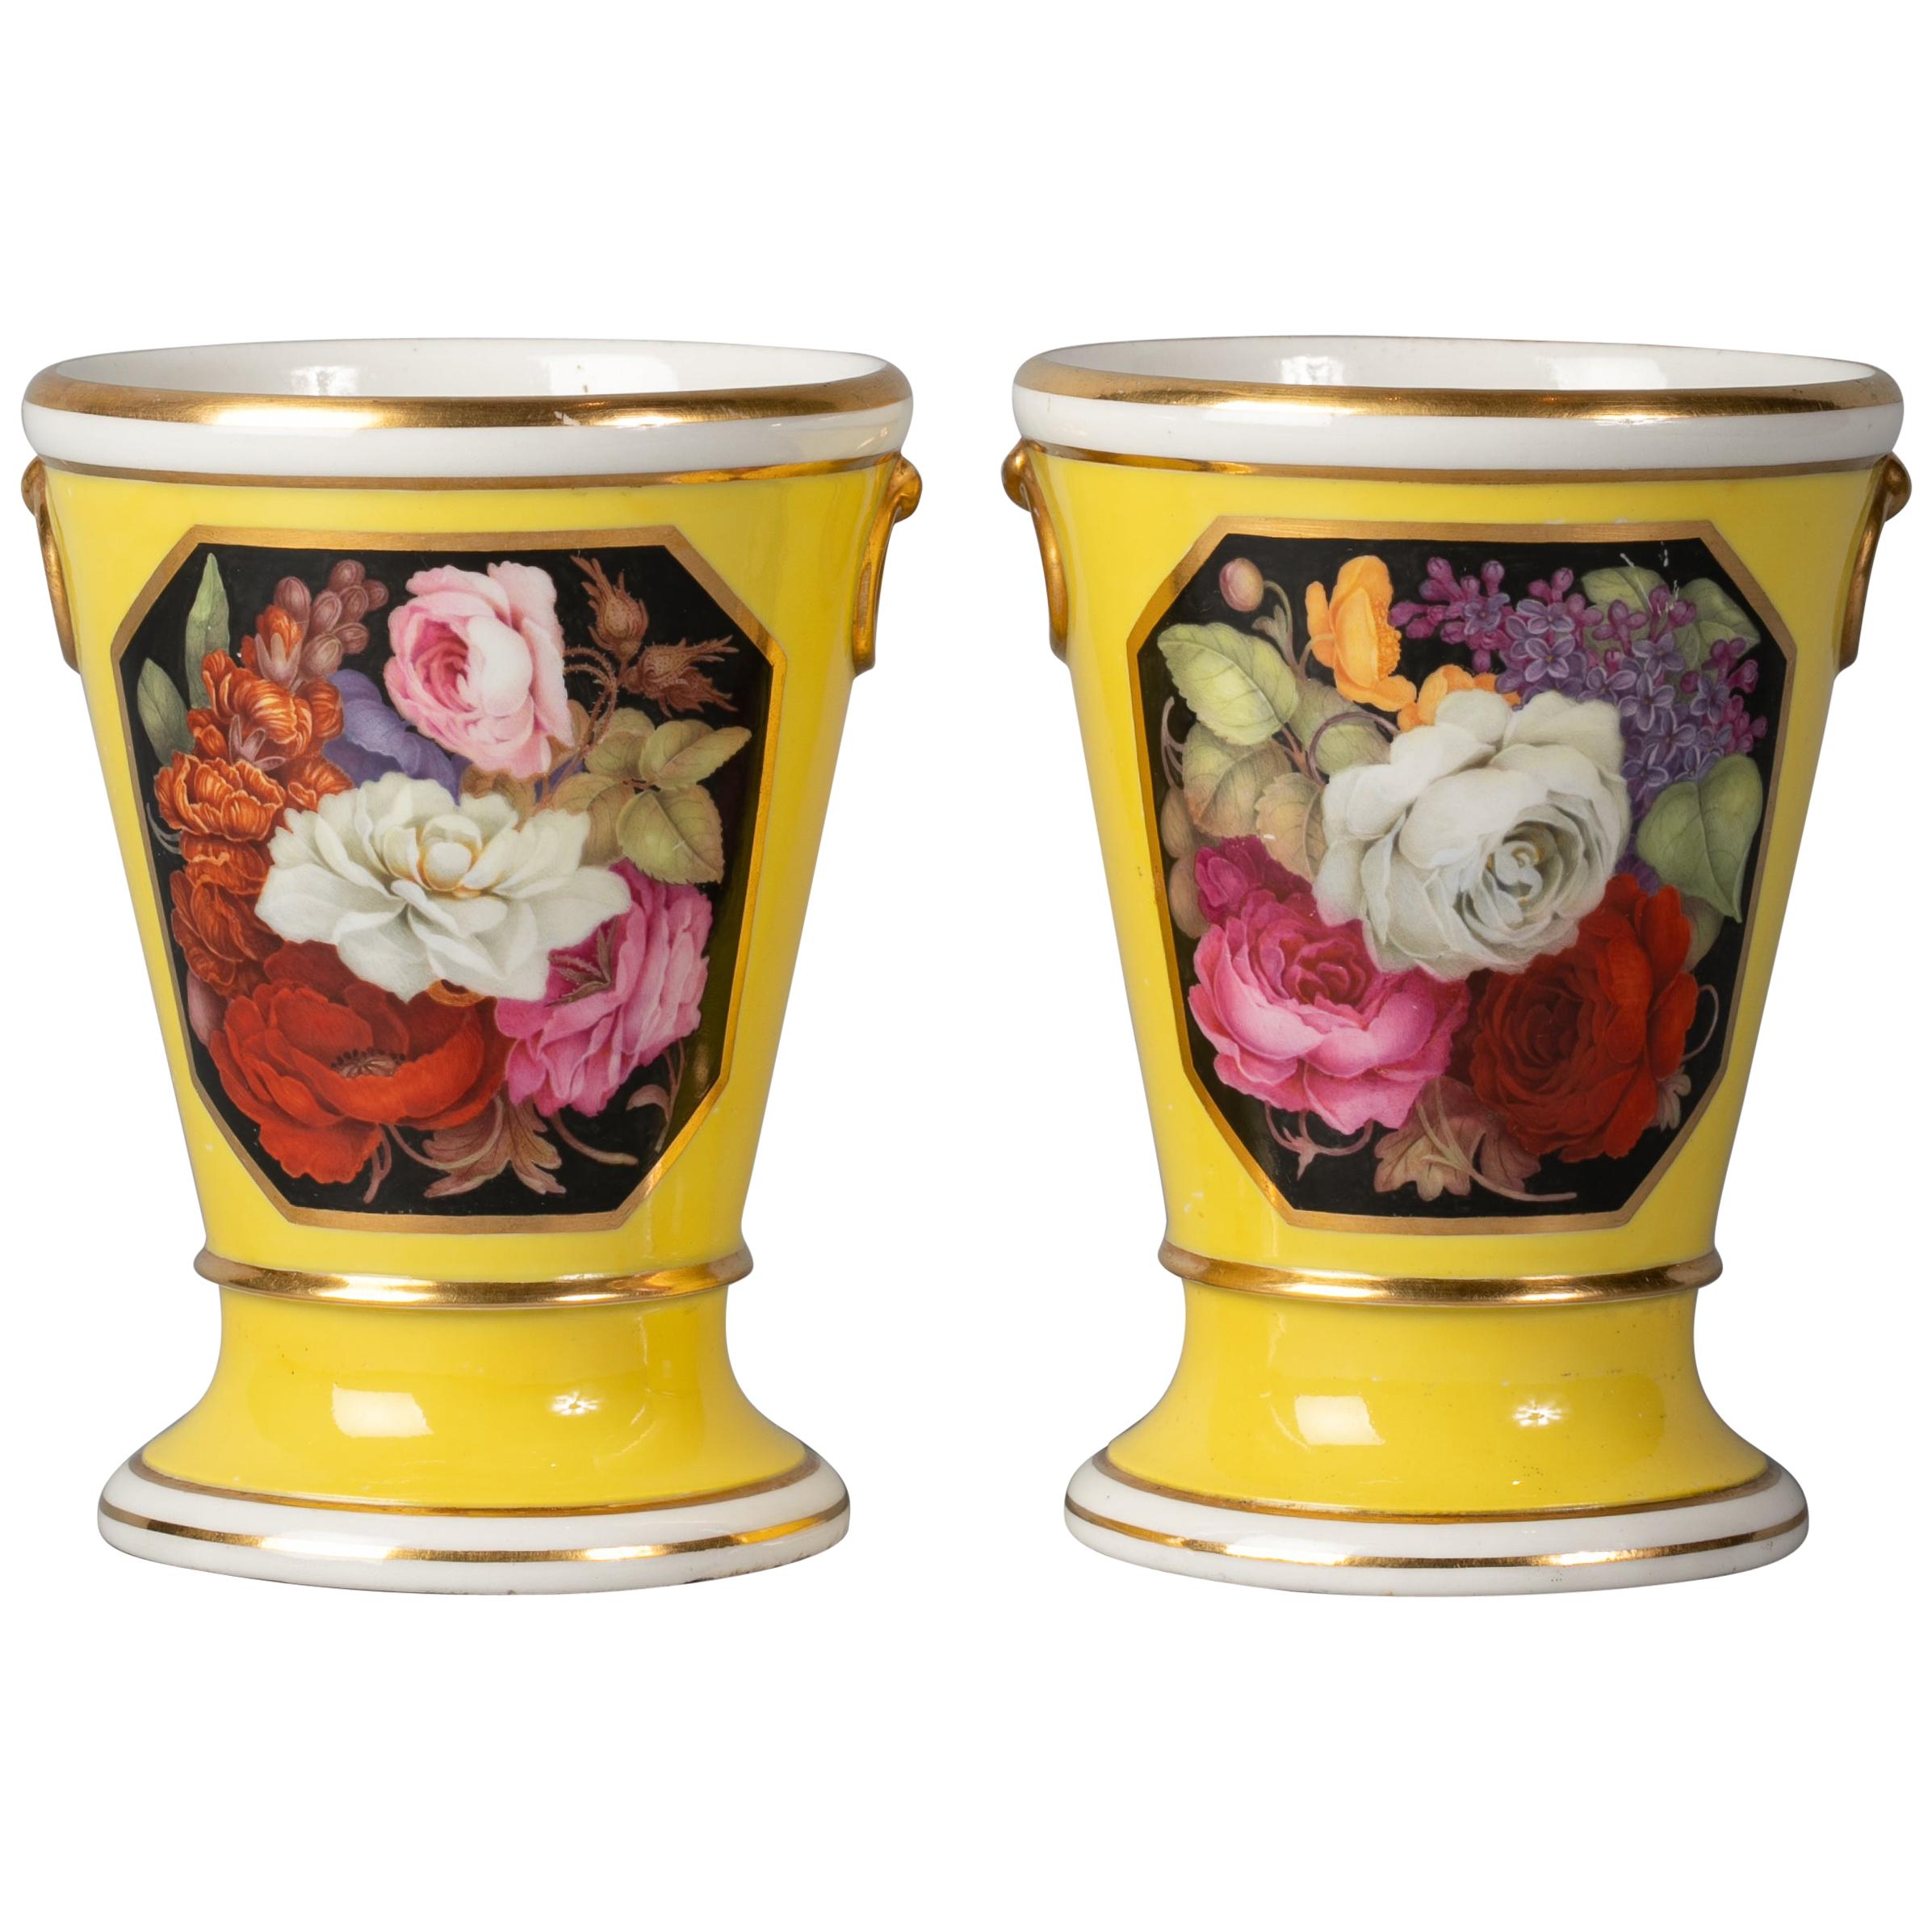 Pair of English Porcelain Yellow-Ground Vases, Worcester, circa 1800